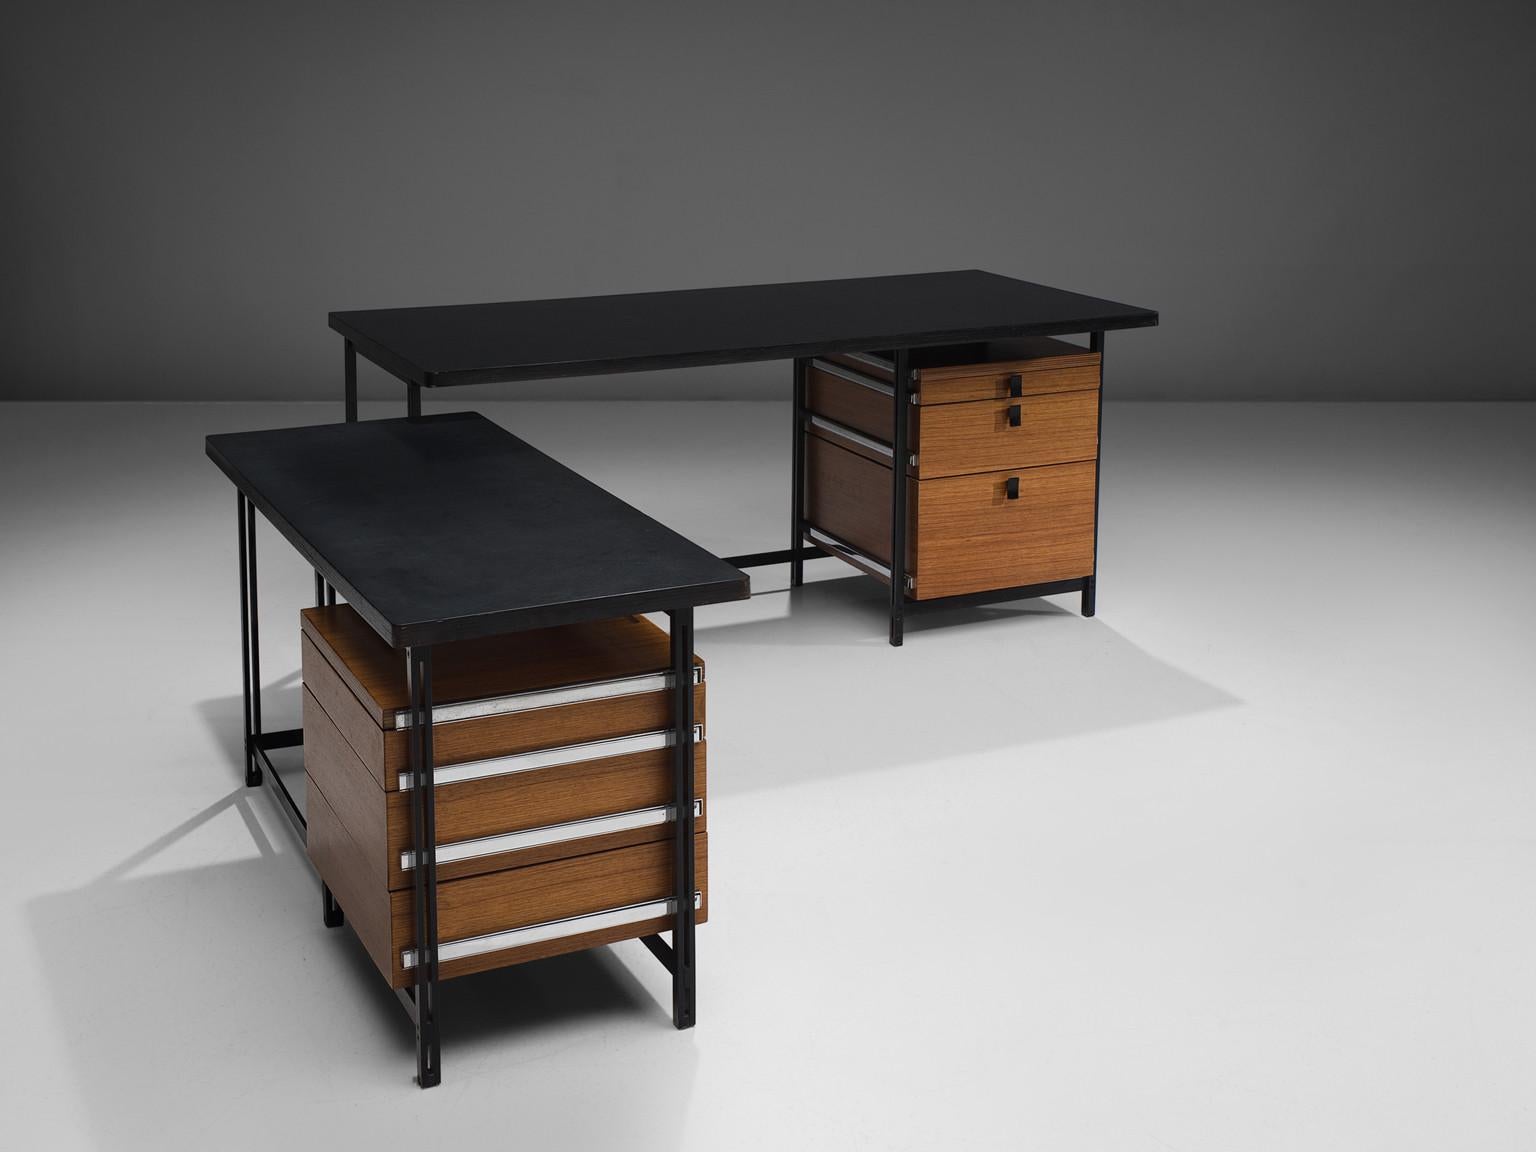 Jules Wabbes, two-part corner writing desk, teak, coated steel, wengé, chrome, Belgium, 1960s

This exceptional free-standing corner desk was crafted by the renowned designer Jules Wabbes during the 1960s. The desk is composed of two distinct